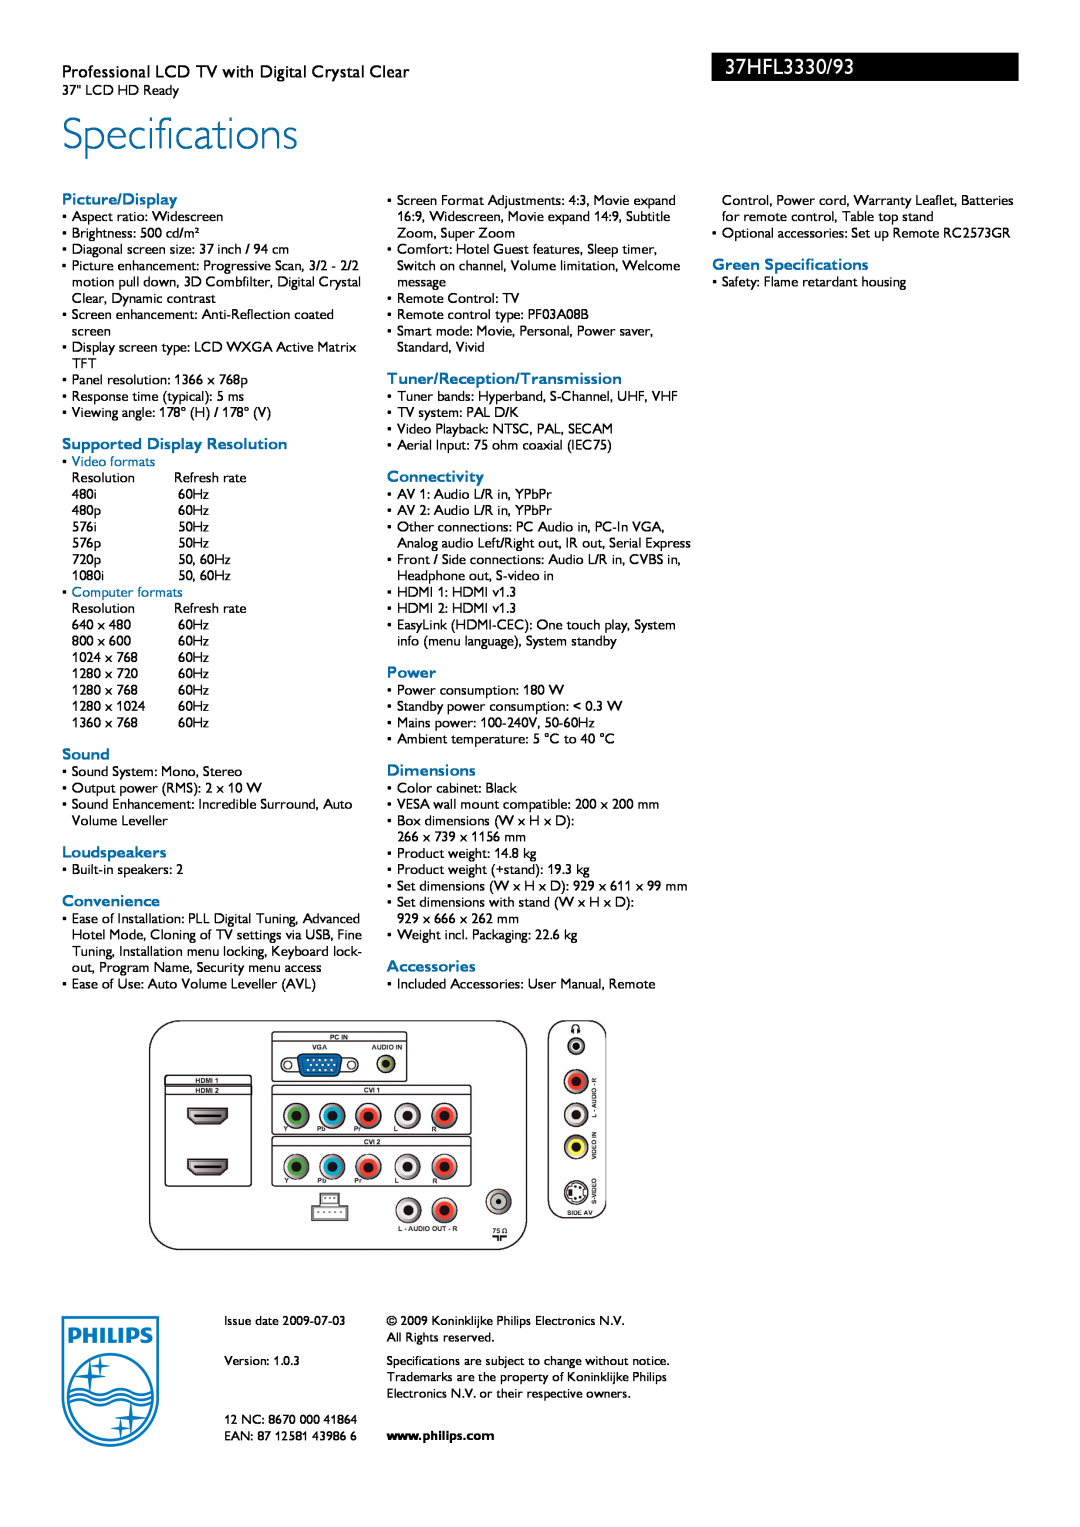 Philips 37HFL3330/93 manual Specifications 